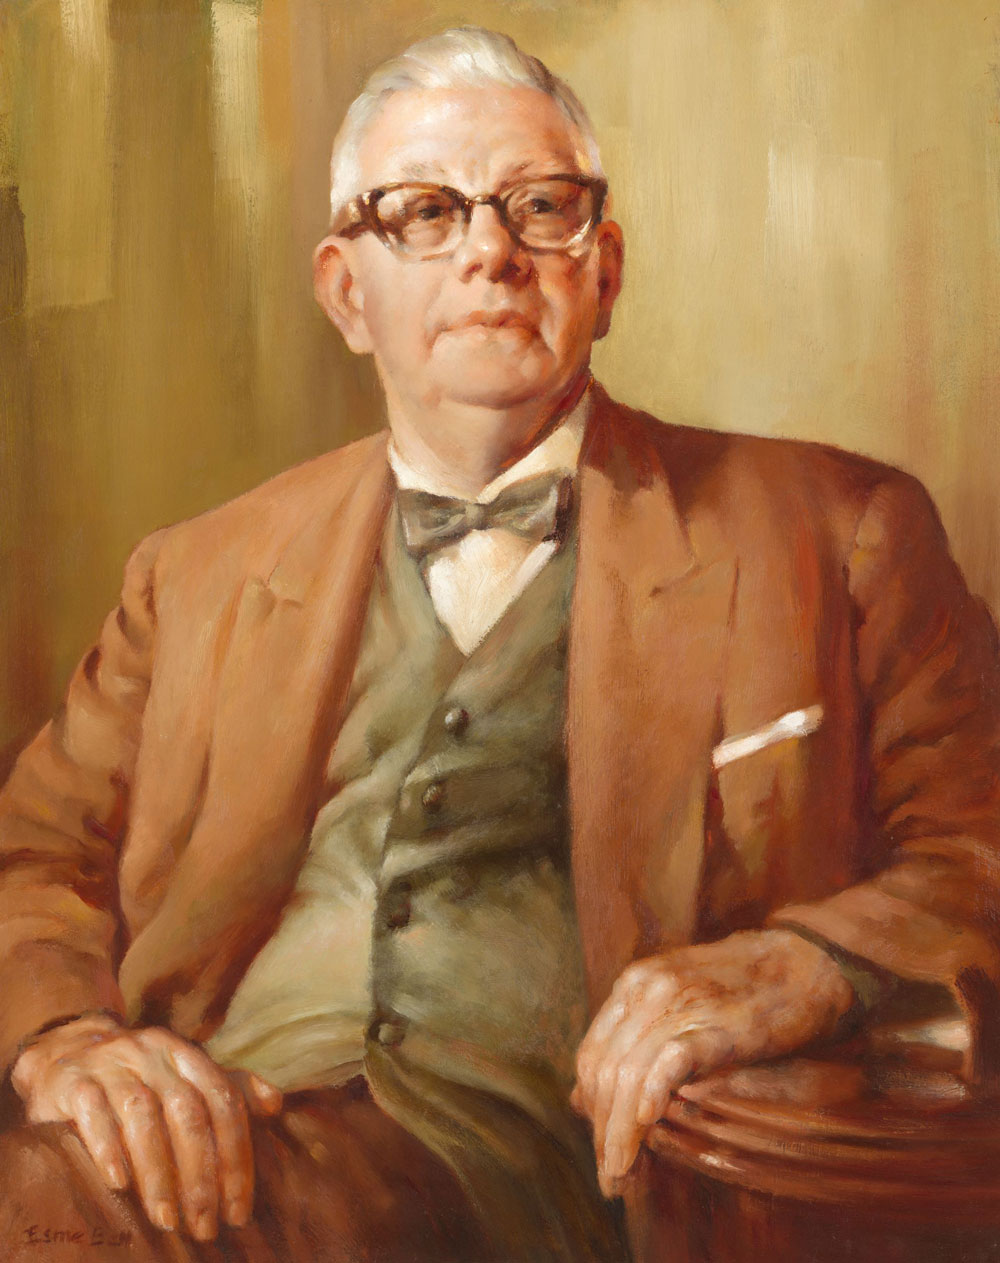 Image 5 of 5 - A formal painted portrait of Sir Edward Hallstrom by artist Esme Bell painted around 1960. Sir Edward is seated, wearing a brown suit, grey vest, and bowtie. The artwork is now part of the National Portrait Gallery Collection